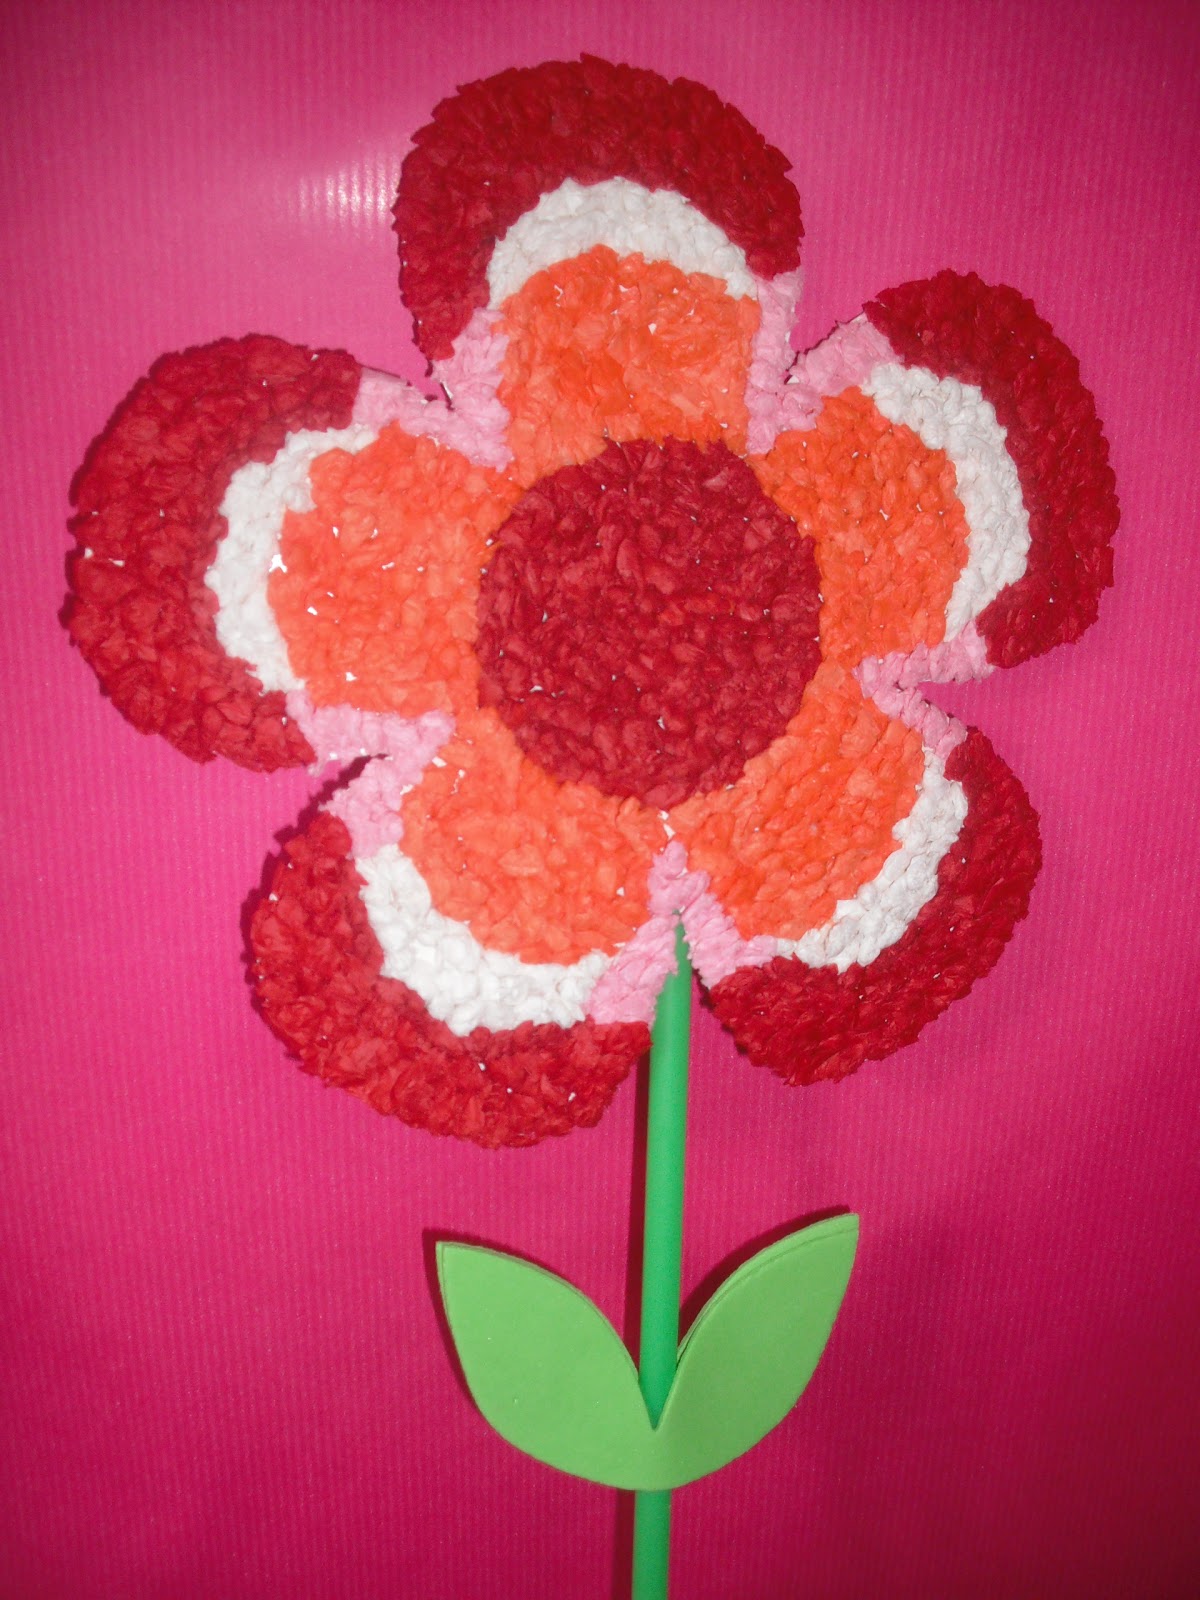 James&May Arts and Crafts Blog: Tissue Paper Flowers